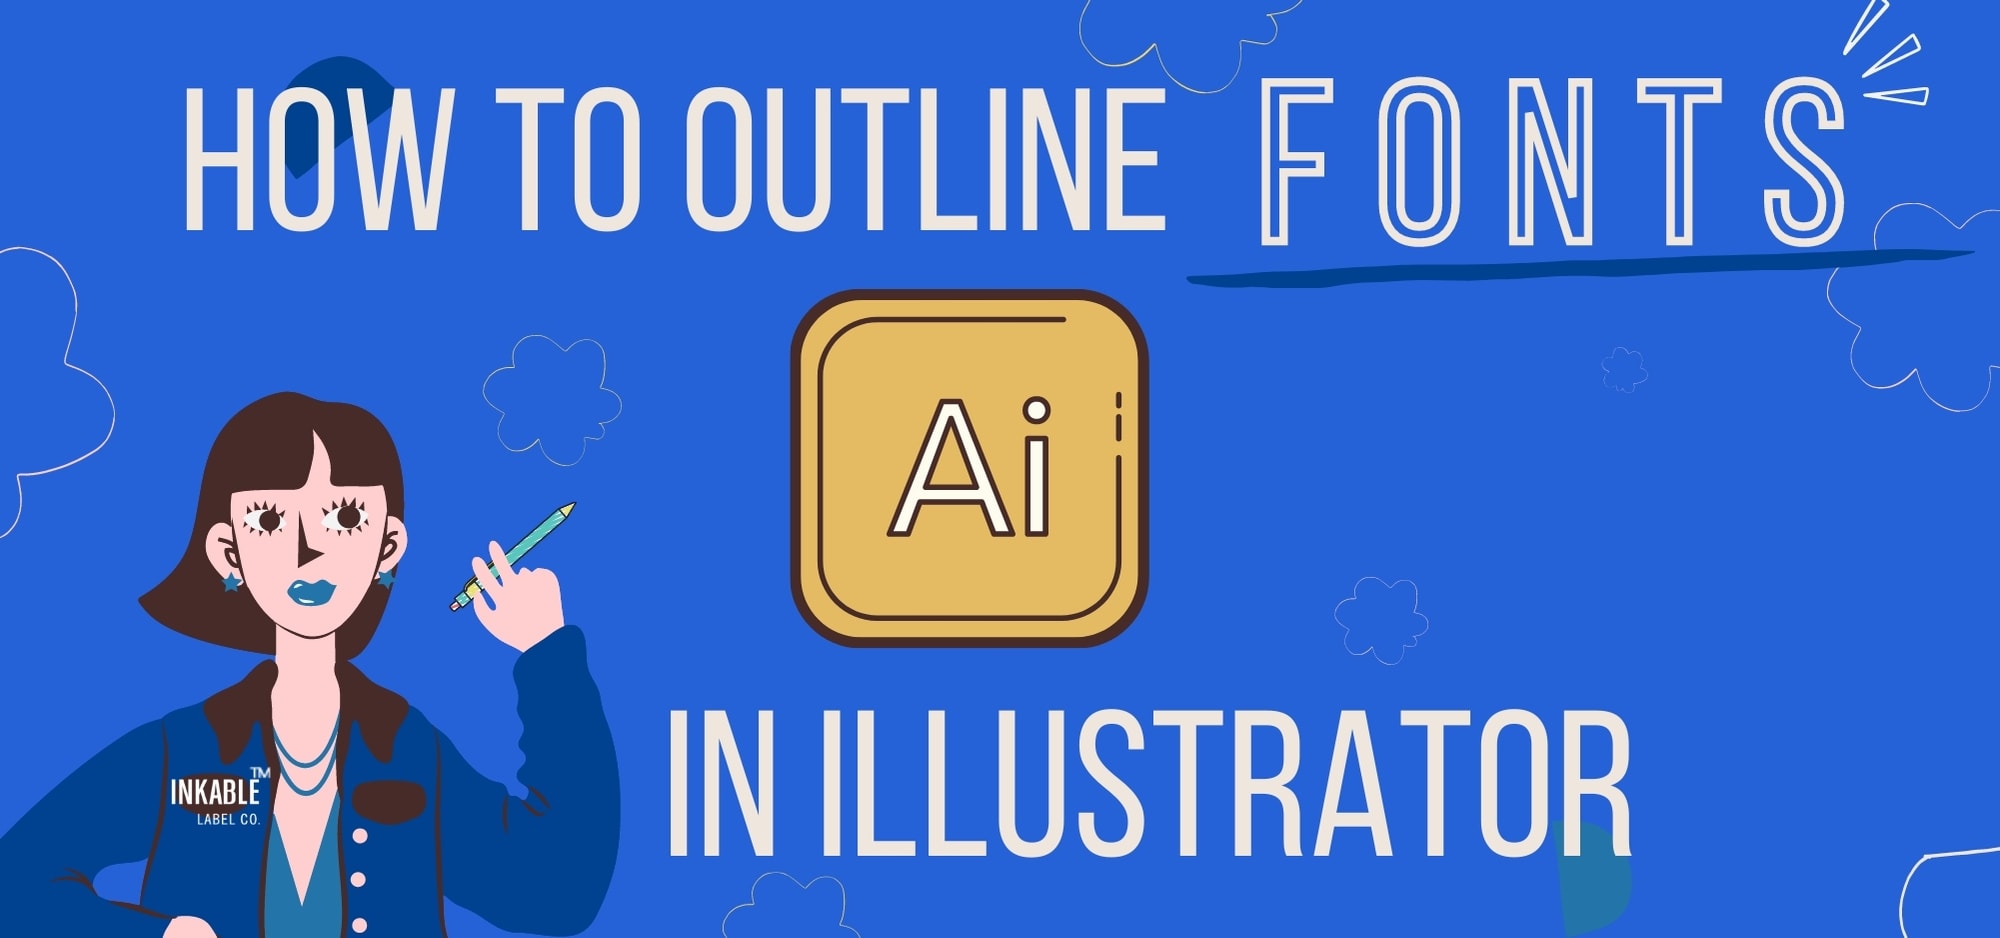 How to Outline Fonts in Illustrator